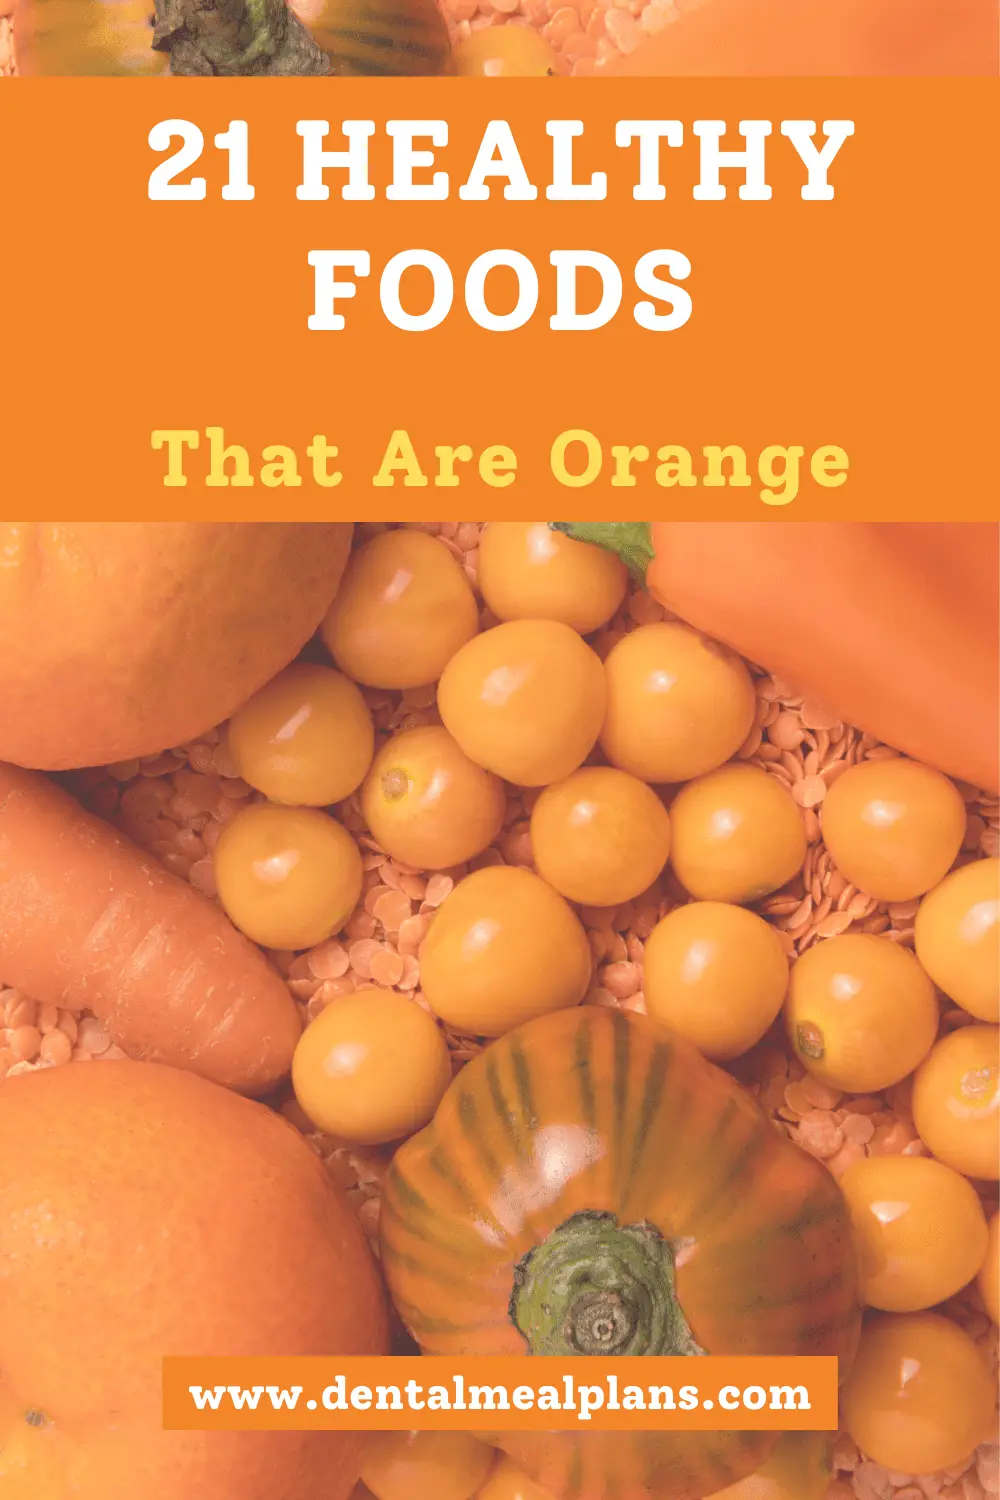 21 healthy foods that are orange image